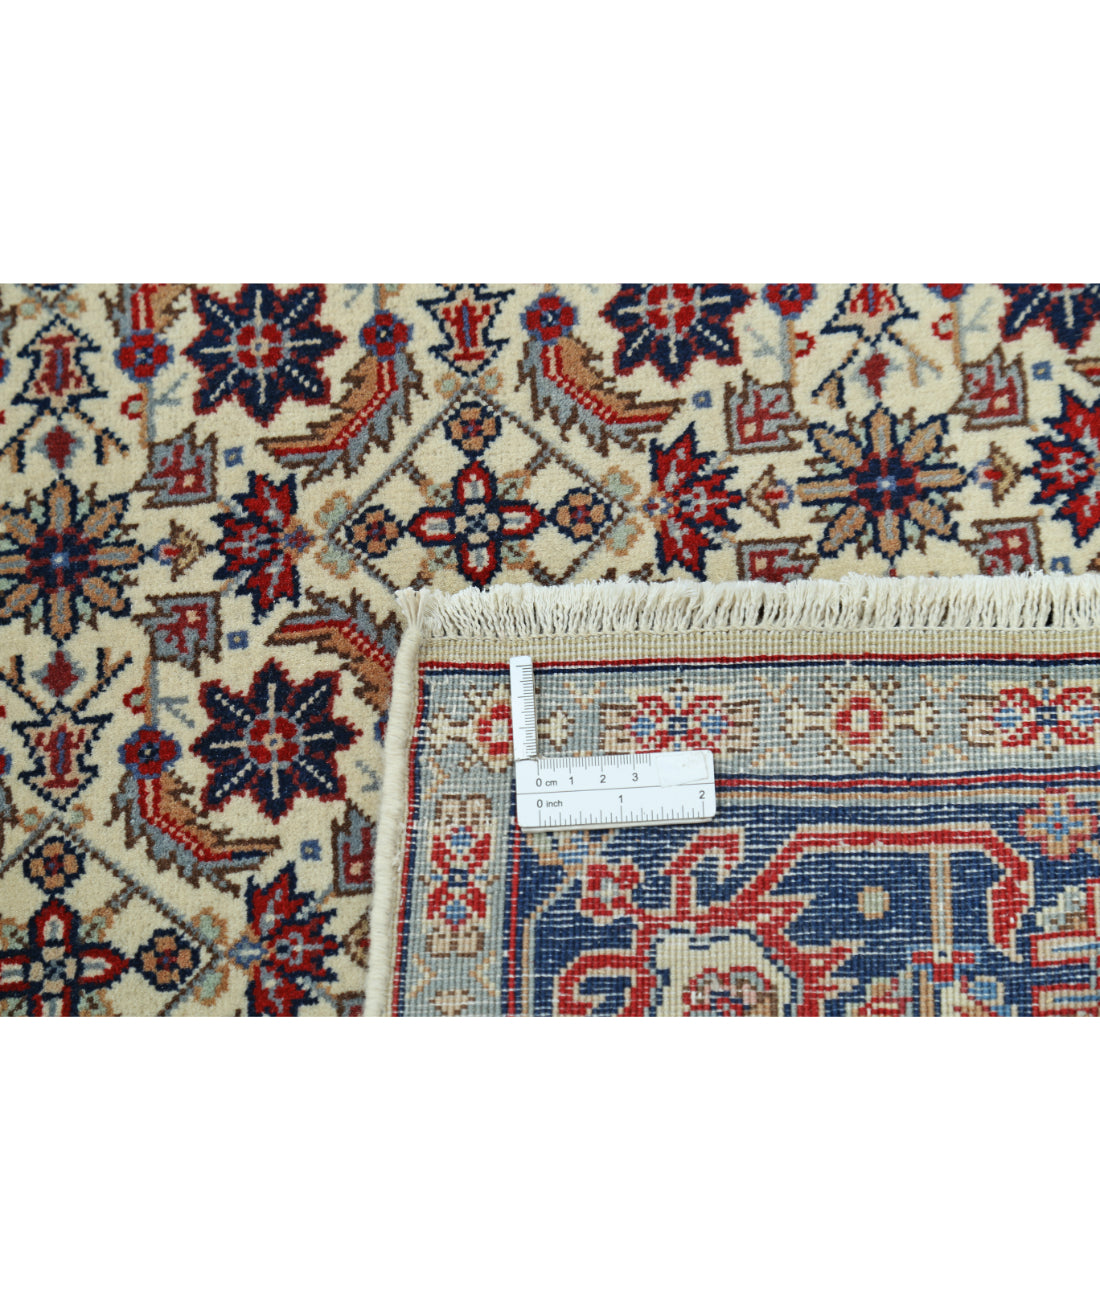 Heritage 4' 0" X 5' 10" Hand-Knotted Wool Rug 4' 0" X 5' 10" (122 X 178) / Ivory / Blue